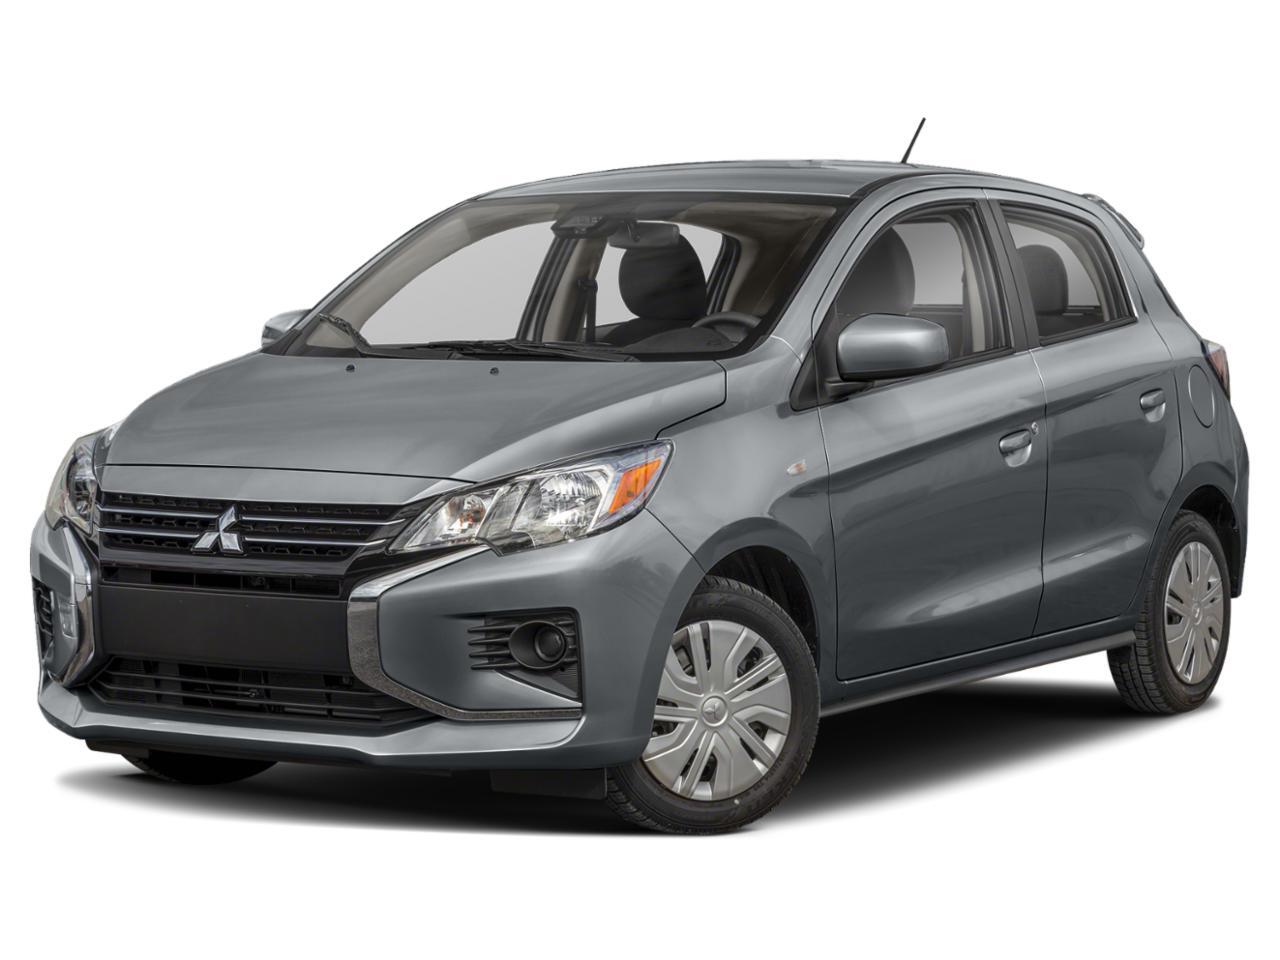 2024 Mitsubishi Mirage ES CVT...On Route from Factory! Buy Today!